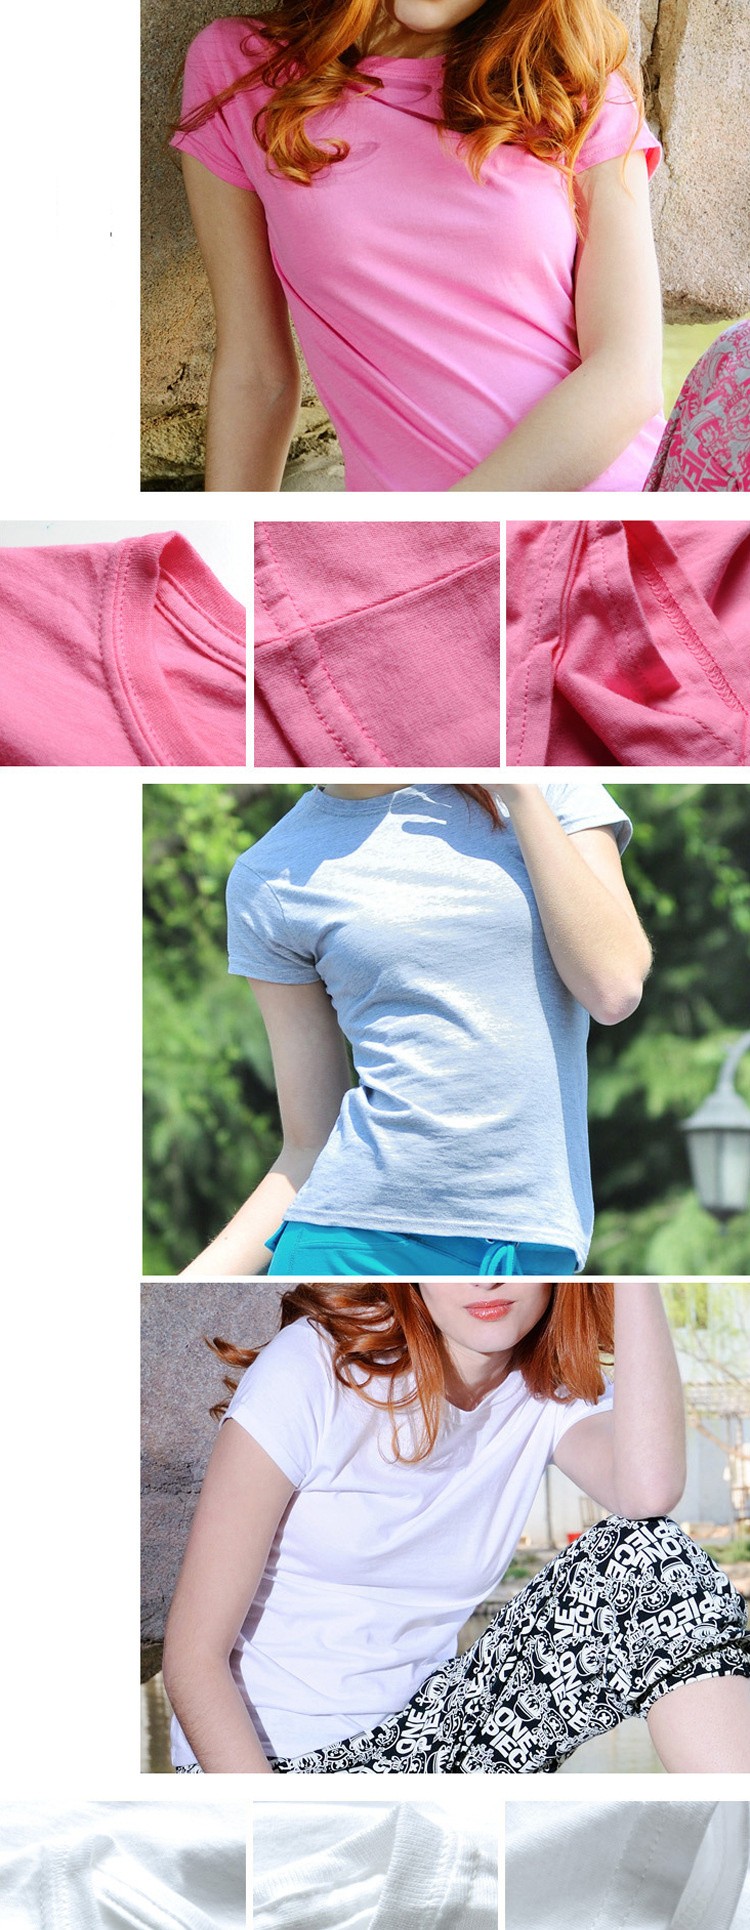 2017-New-High-Quality-10-Color-Silm-T-Shirt-Women-Solid-color-Tees-Plain-Cotton-short-sleeve-Women-T-32731671718